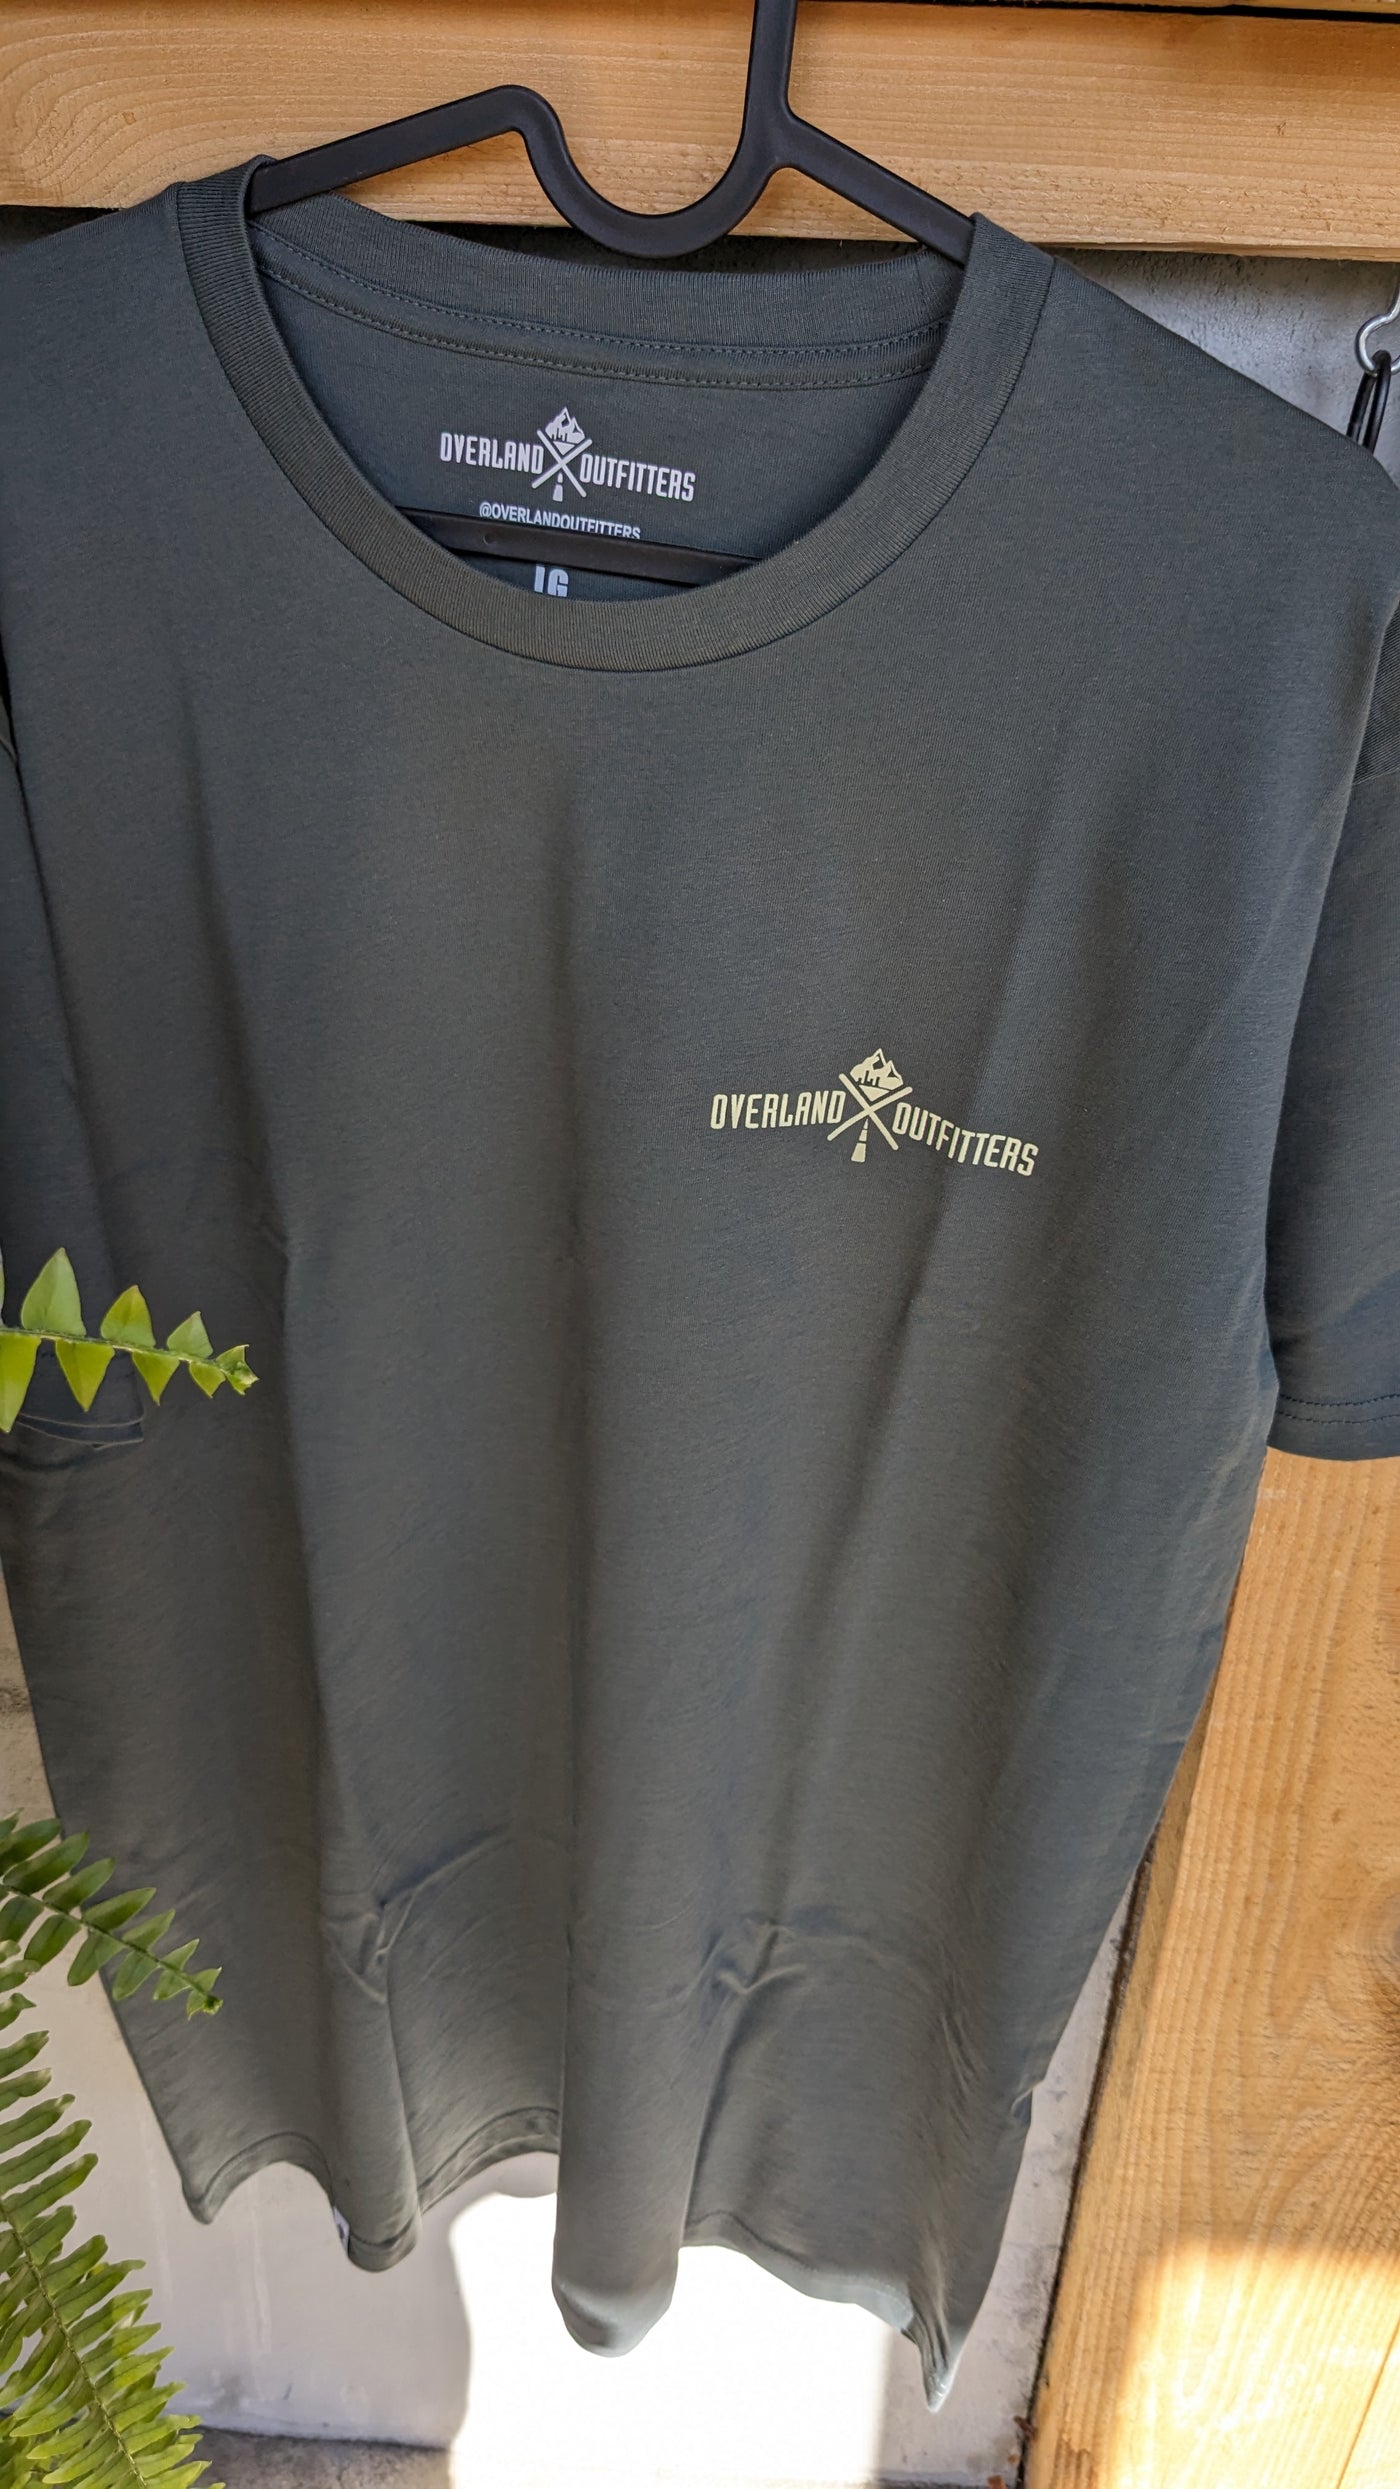 Overland Outfitters Hard Road Tee